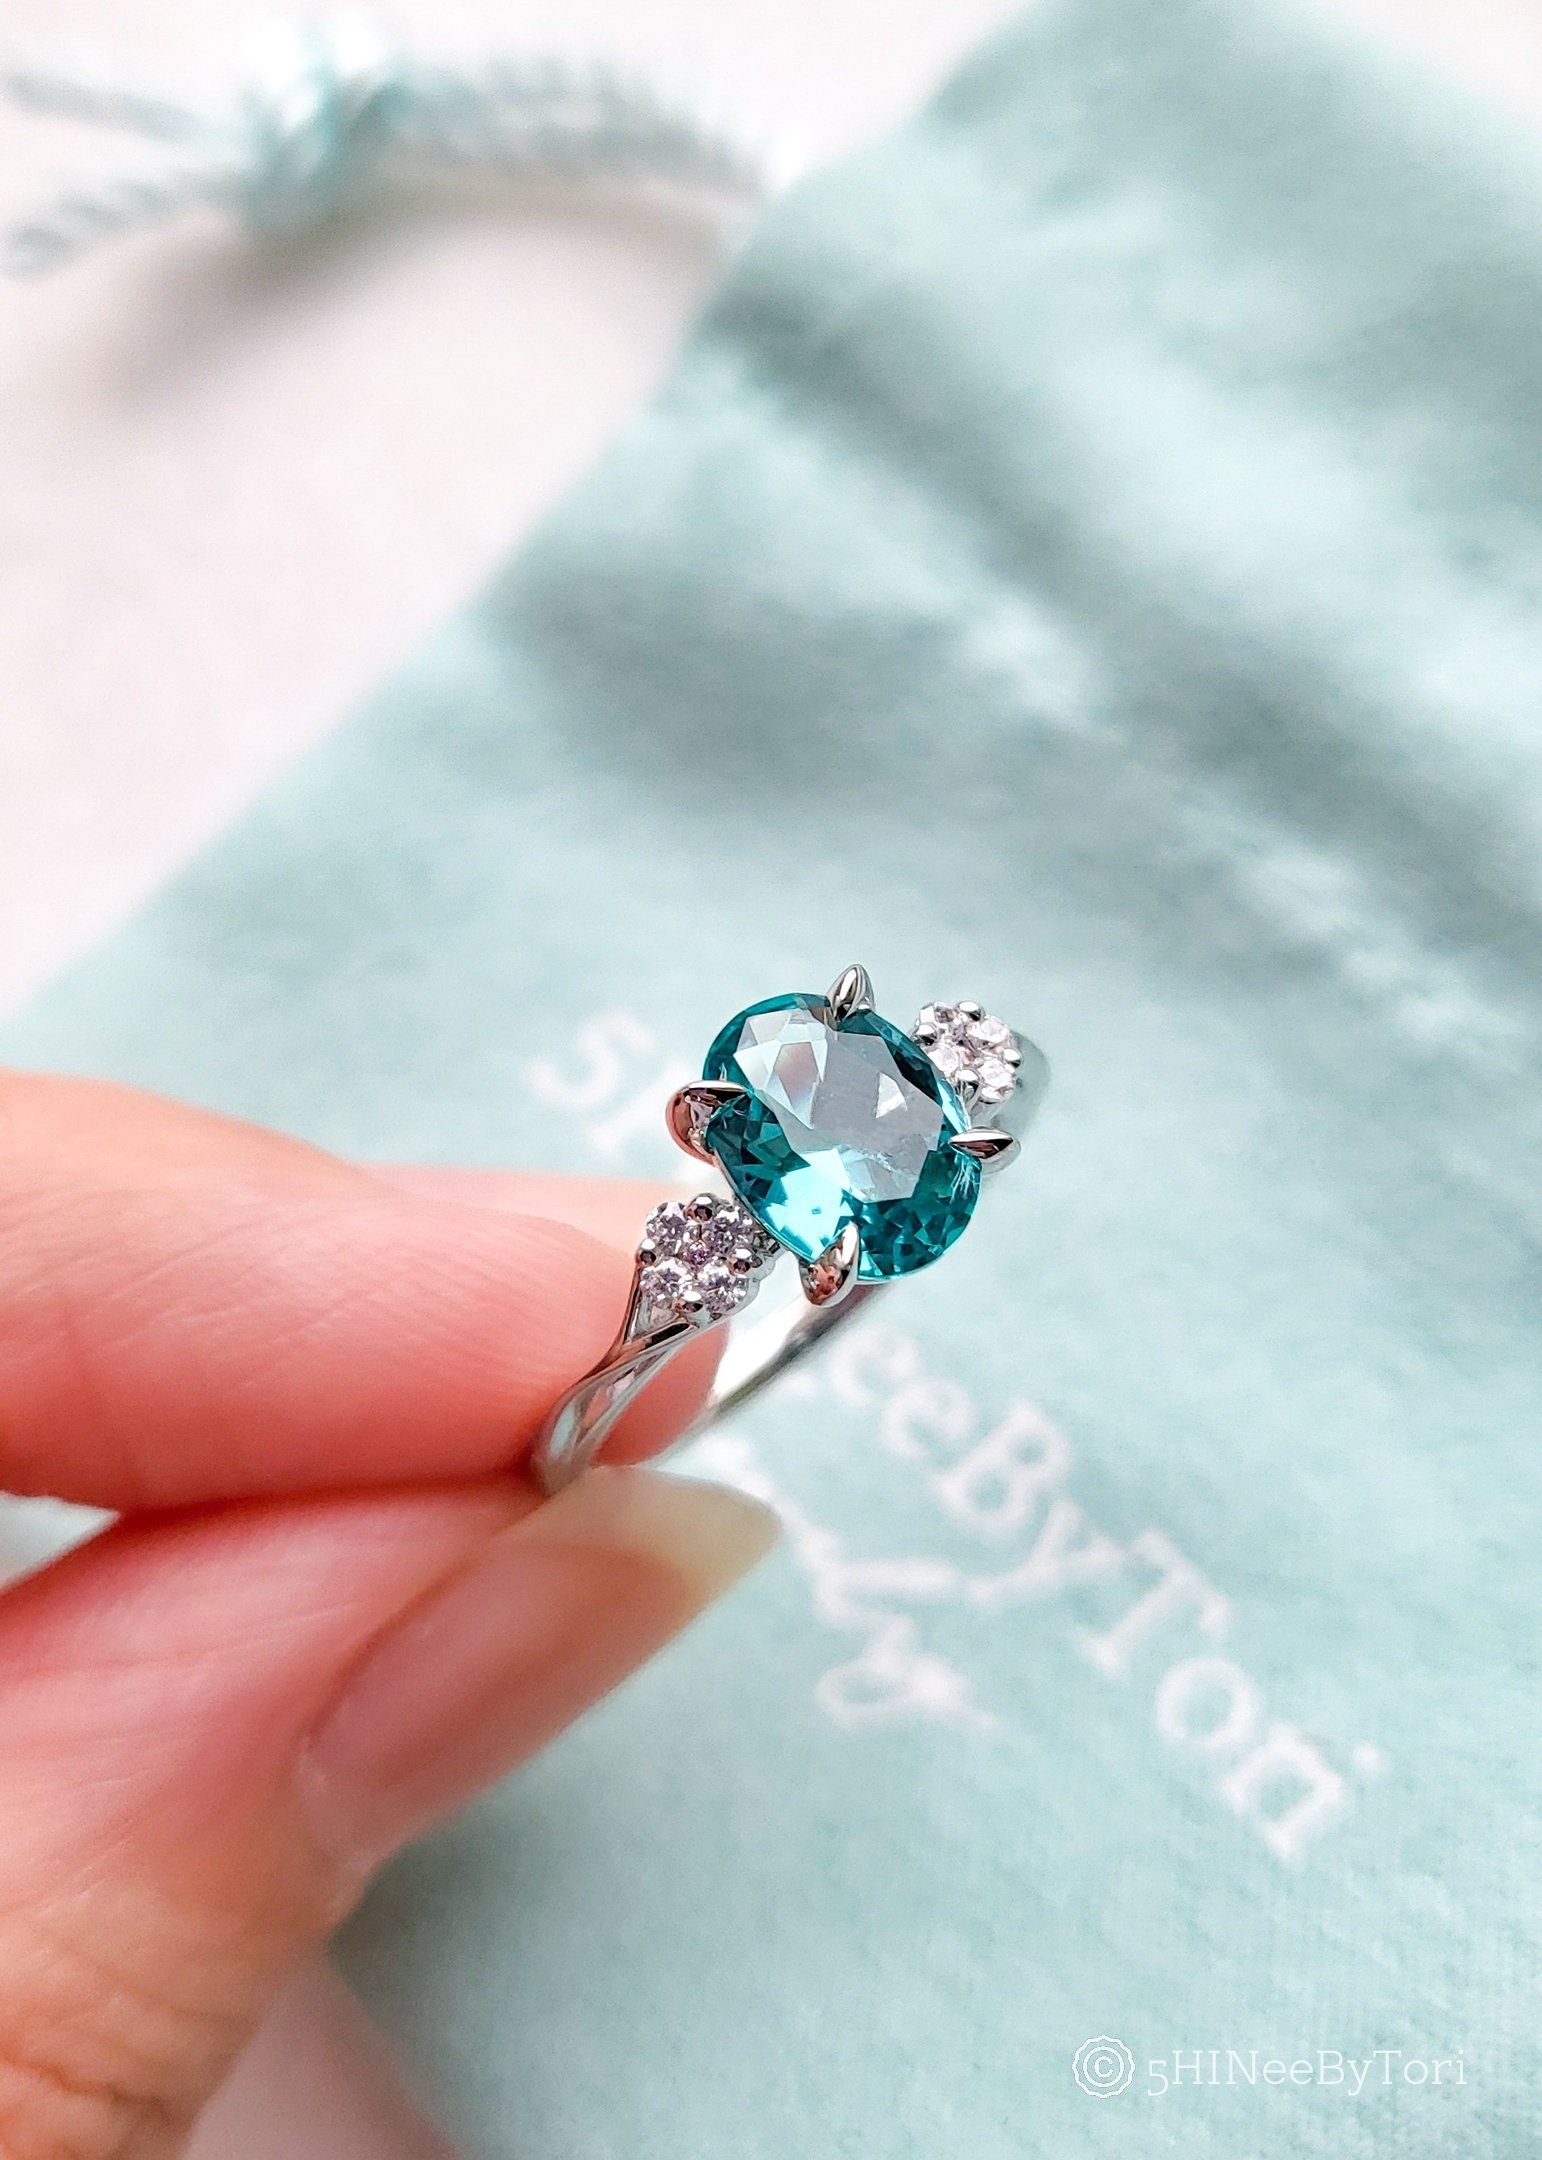 NEW Tiffany co engagement ring in blue box snow globe from Japan